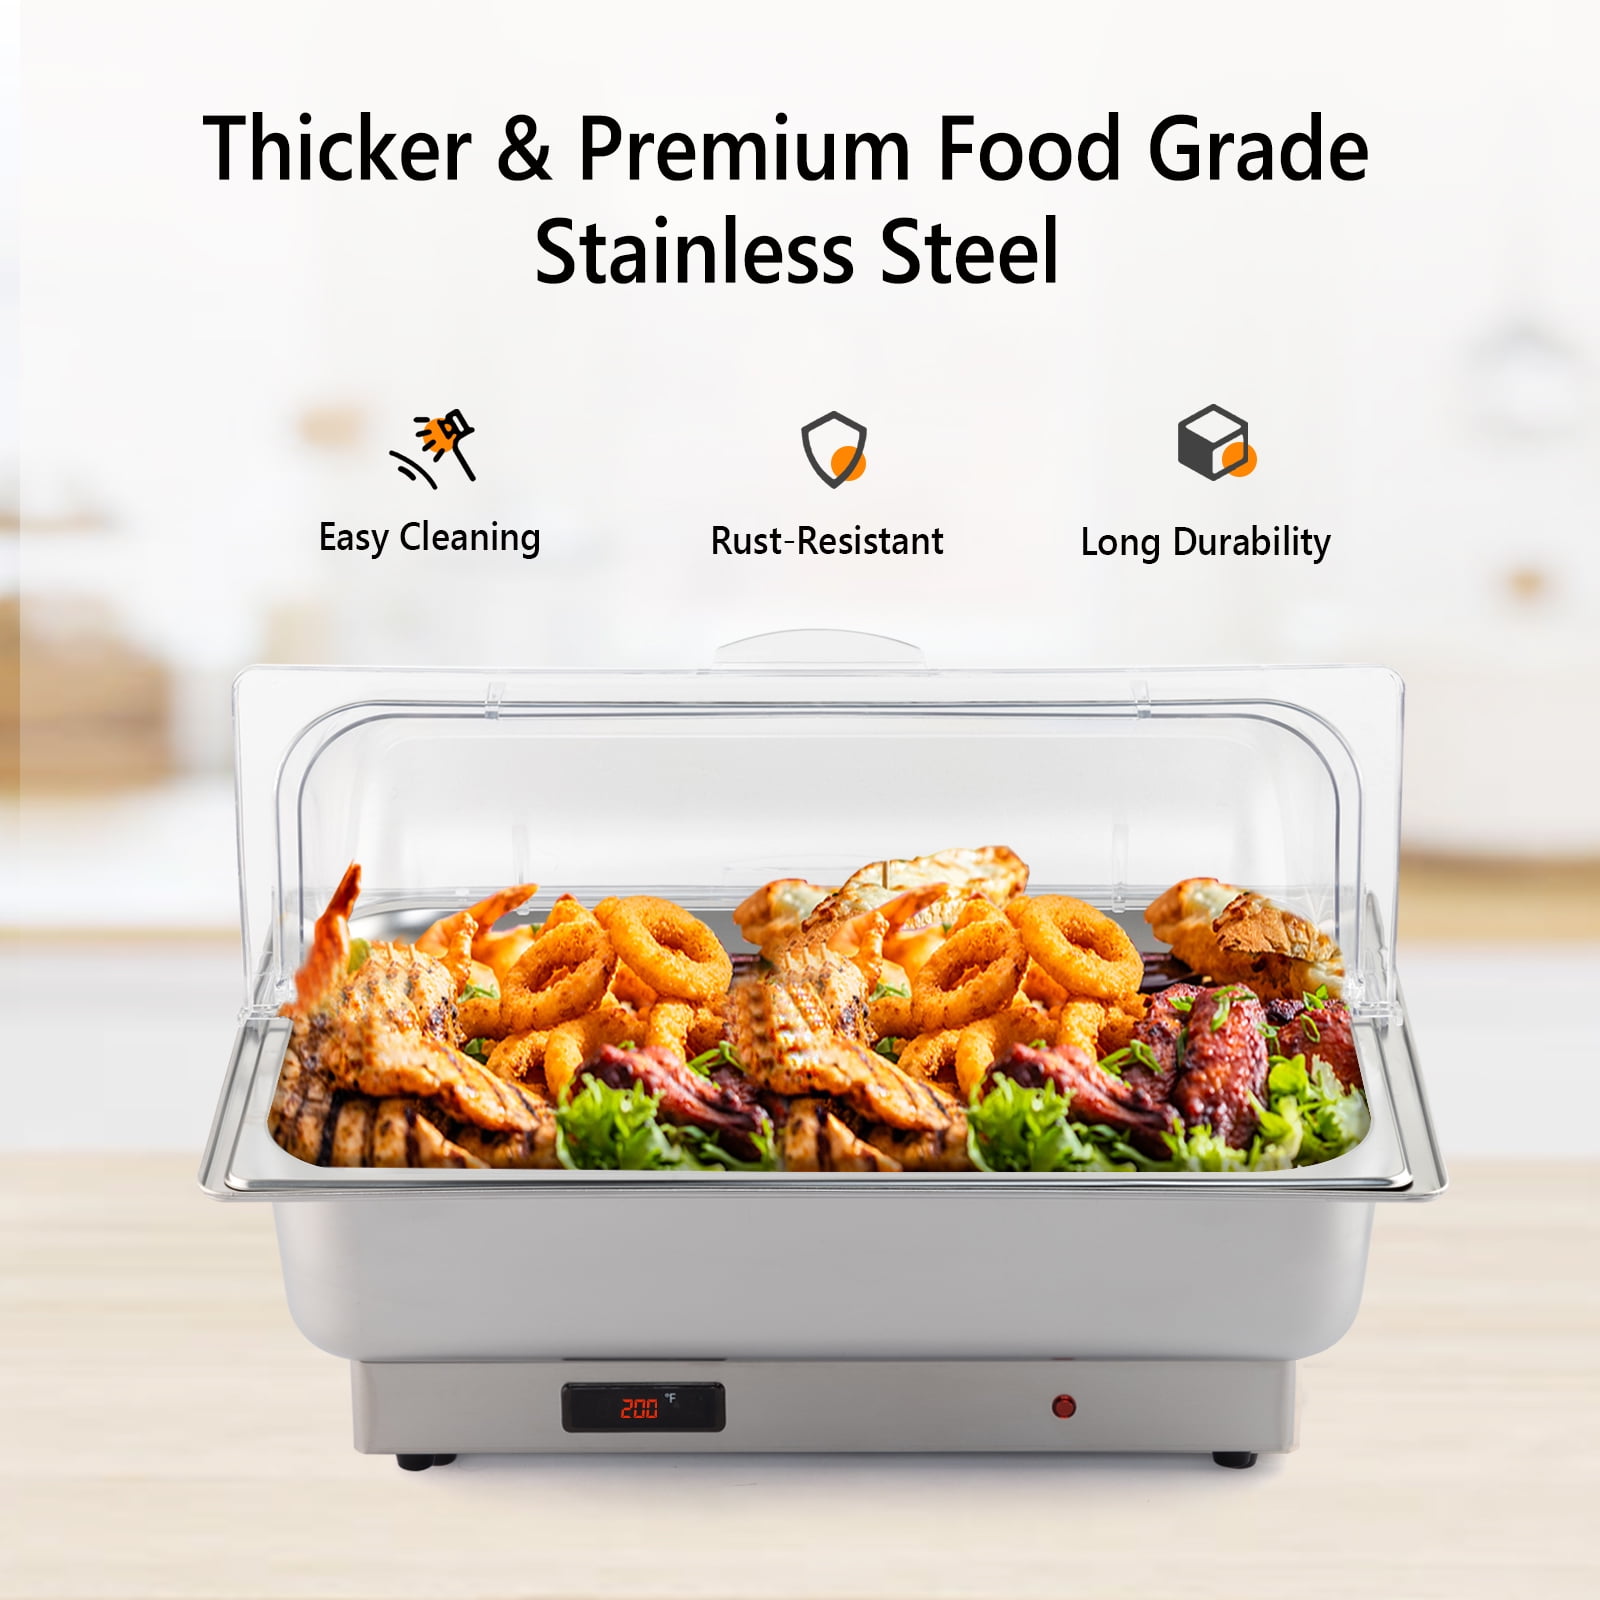 Electric Chafing Dish 9 QT Adjustable 0°C~100°C Roll Top Full Size Auto  ShutOff Stainless Steel Buffet Servers and Warmers, Temp Display  Programmable